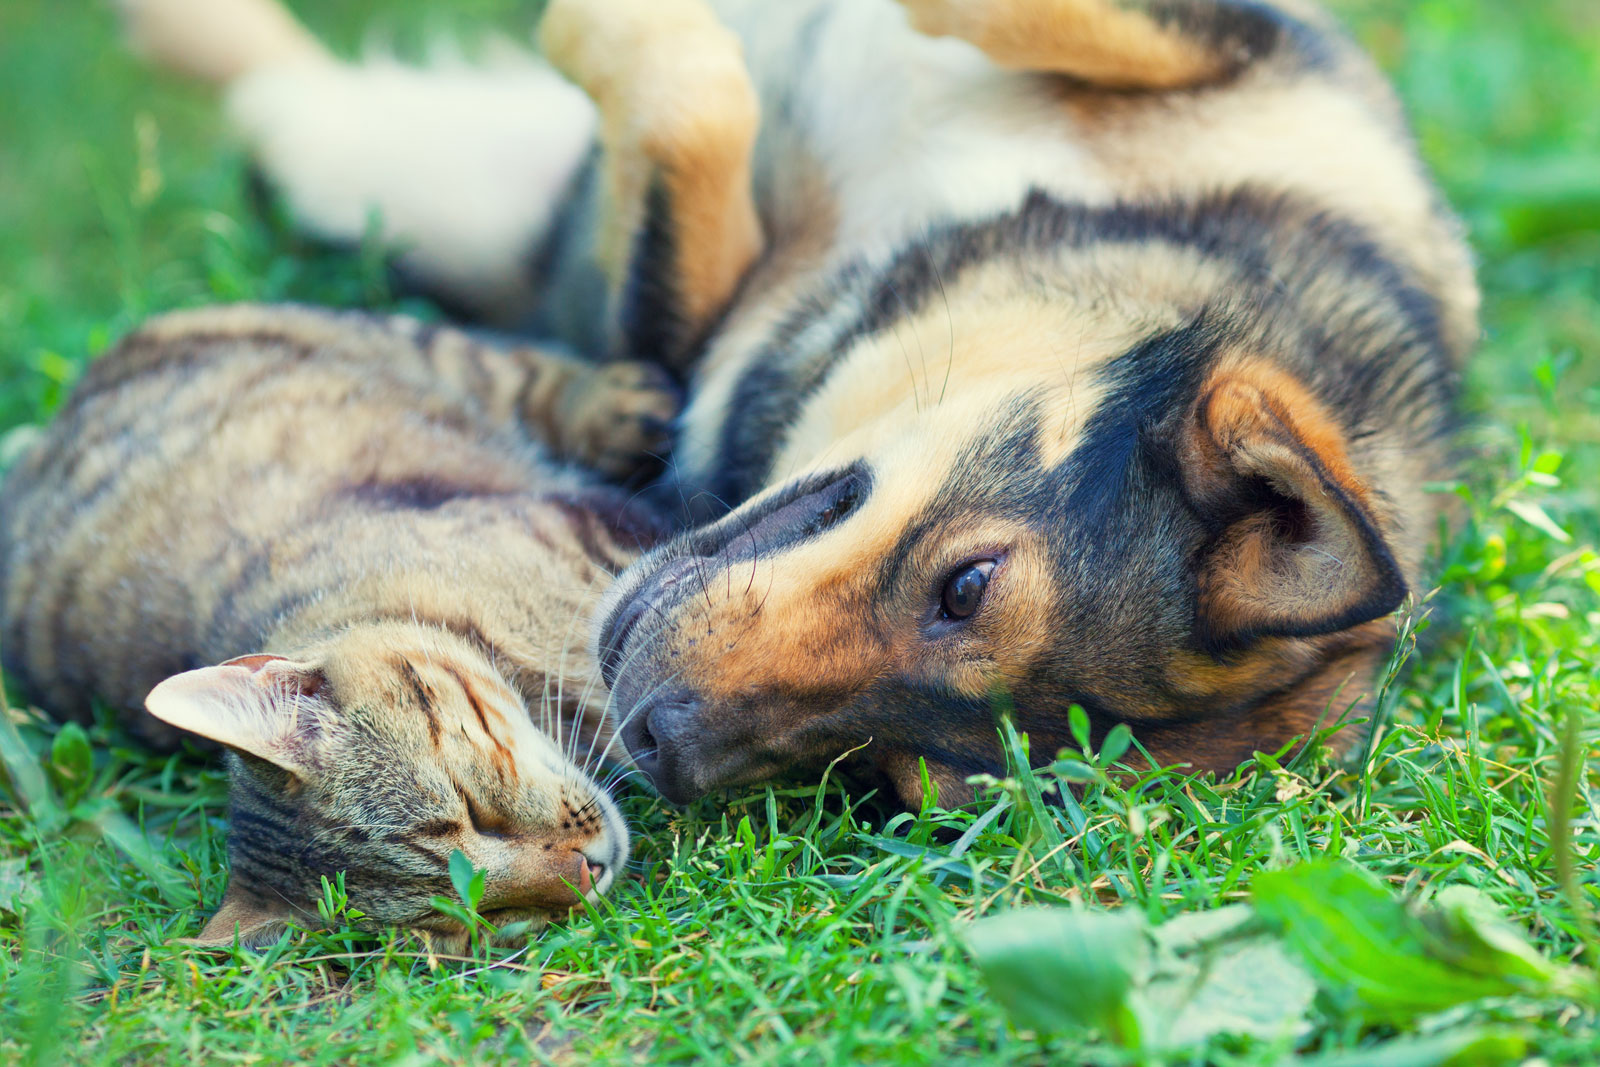 5 Ways CBD Can Help With Your Pet’s Health